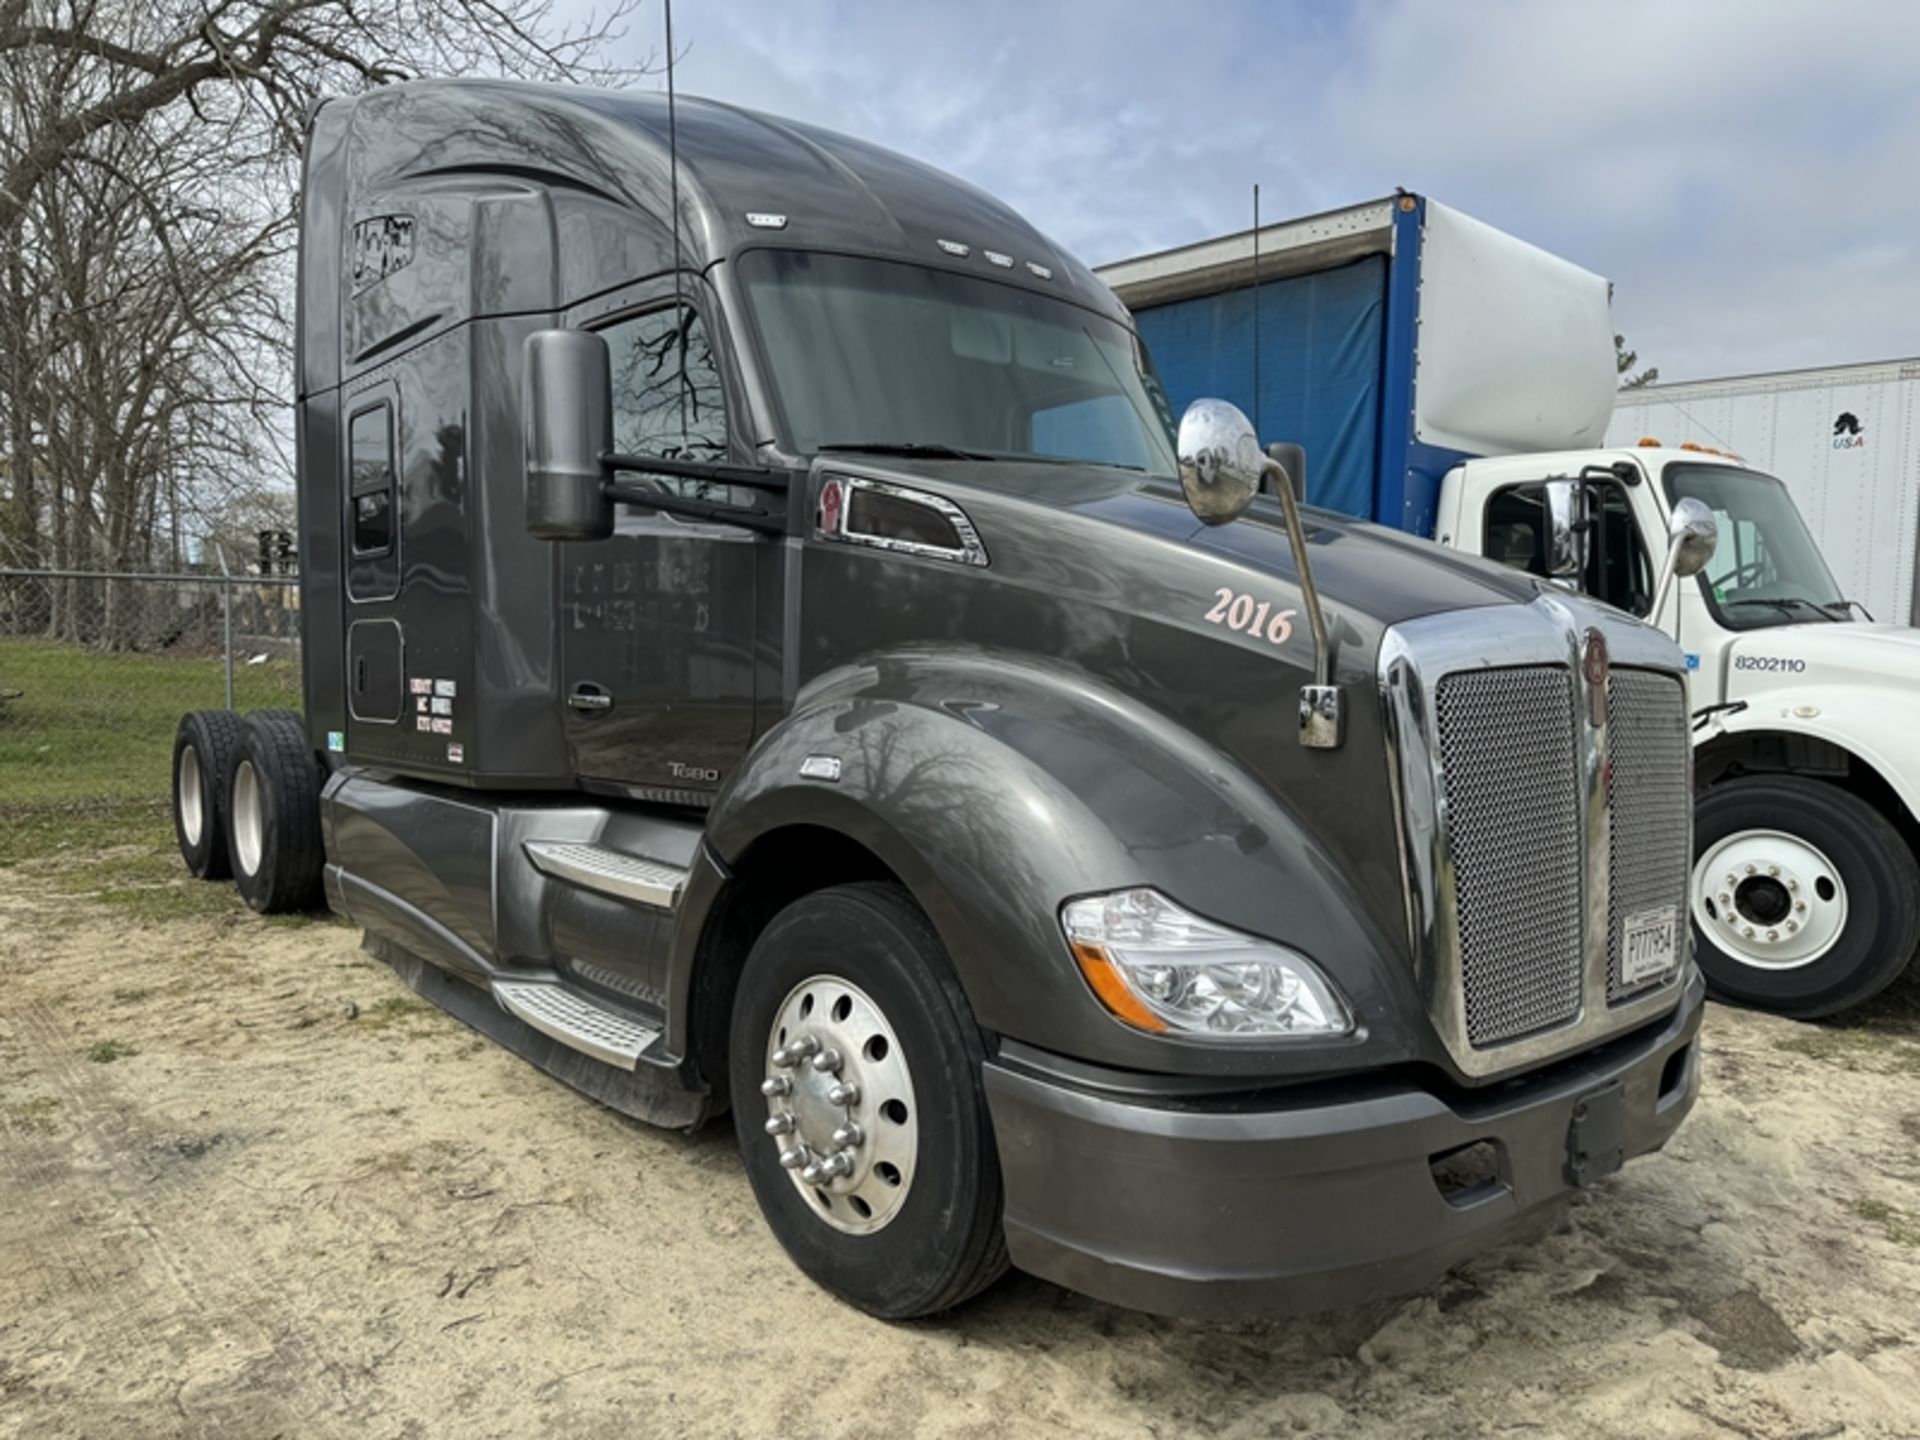 2016 KENWORTH T680 Paccar engine, auto trans - 743,522 miles showing - 1XKYDP9X8GJ111775 - Image 2 of 6